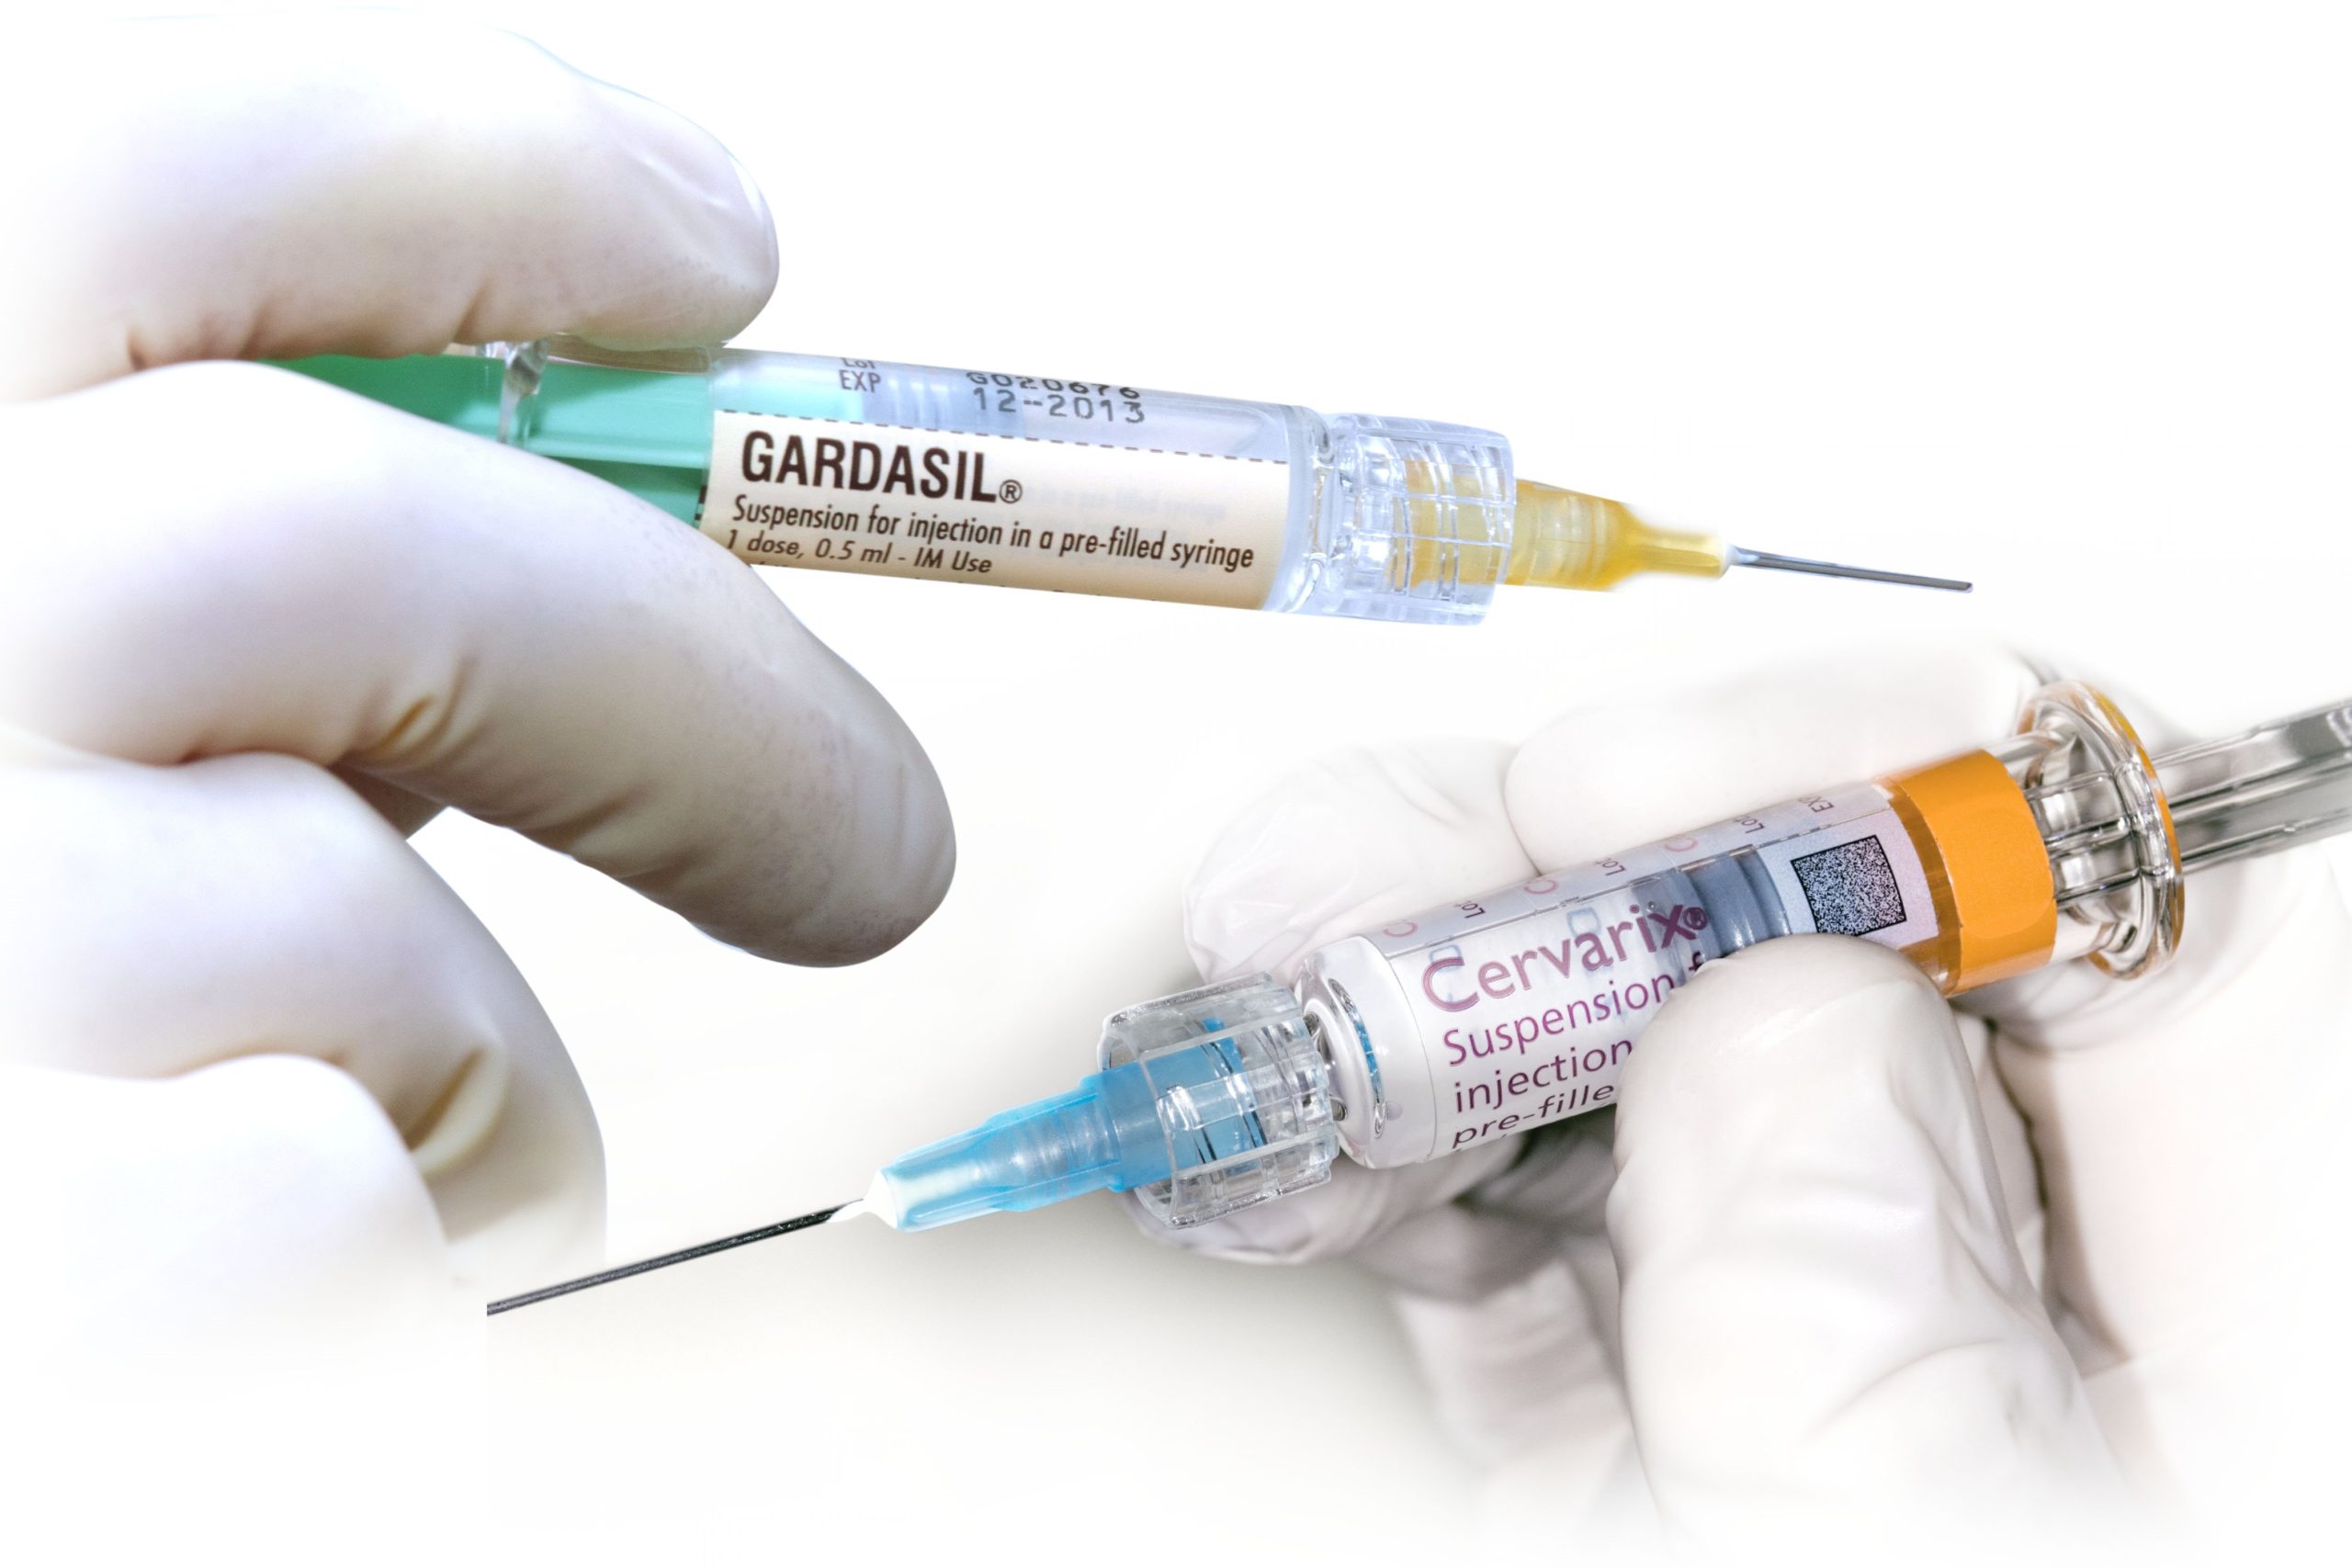 Trials of HPV vaccine may have overestimated its efficacy, study finds -  The Pharmaceutical Journal